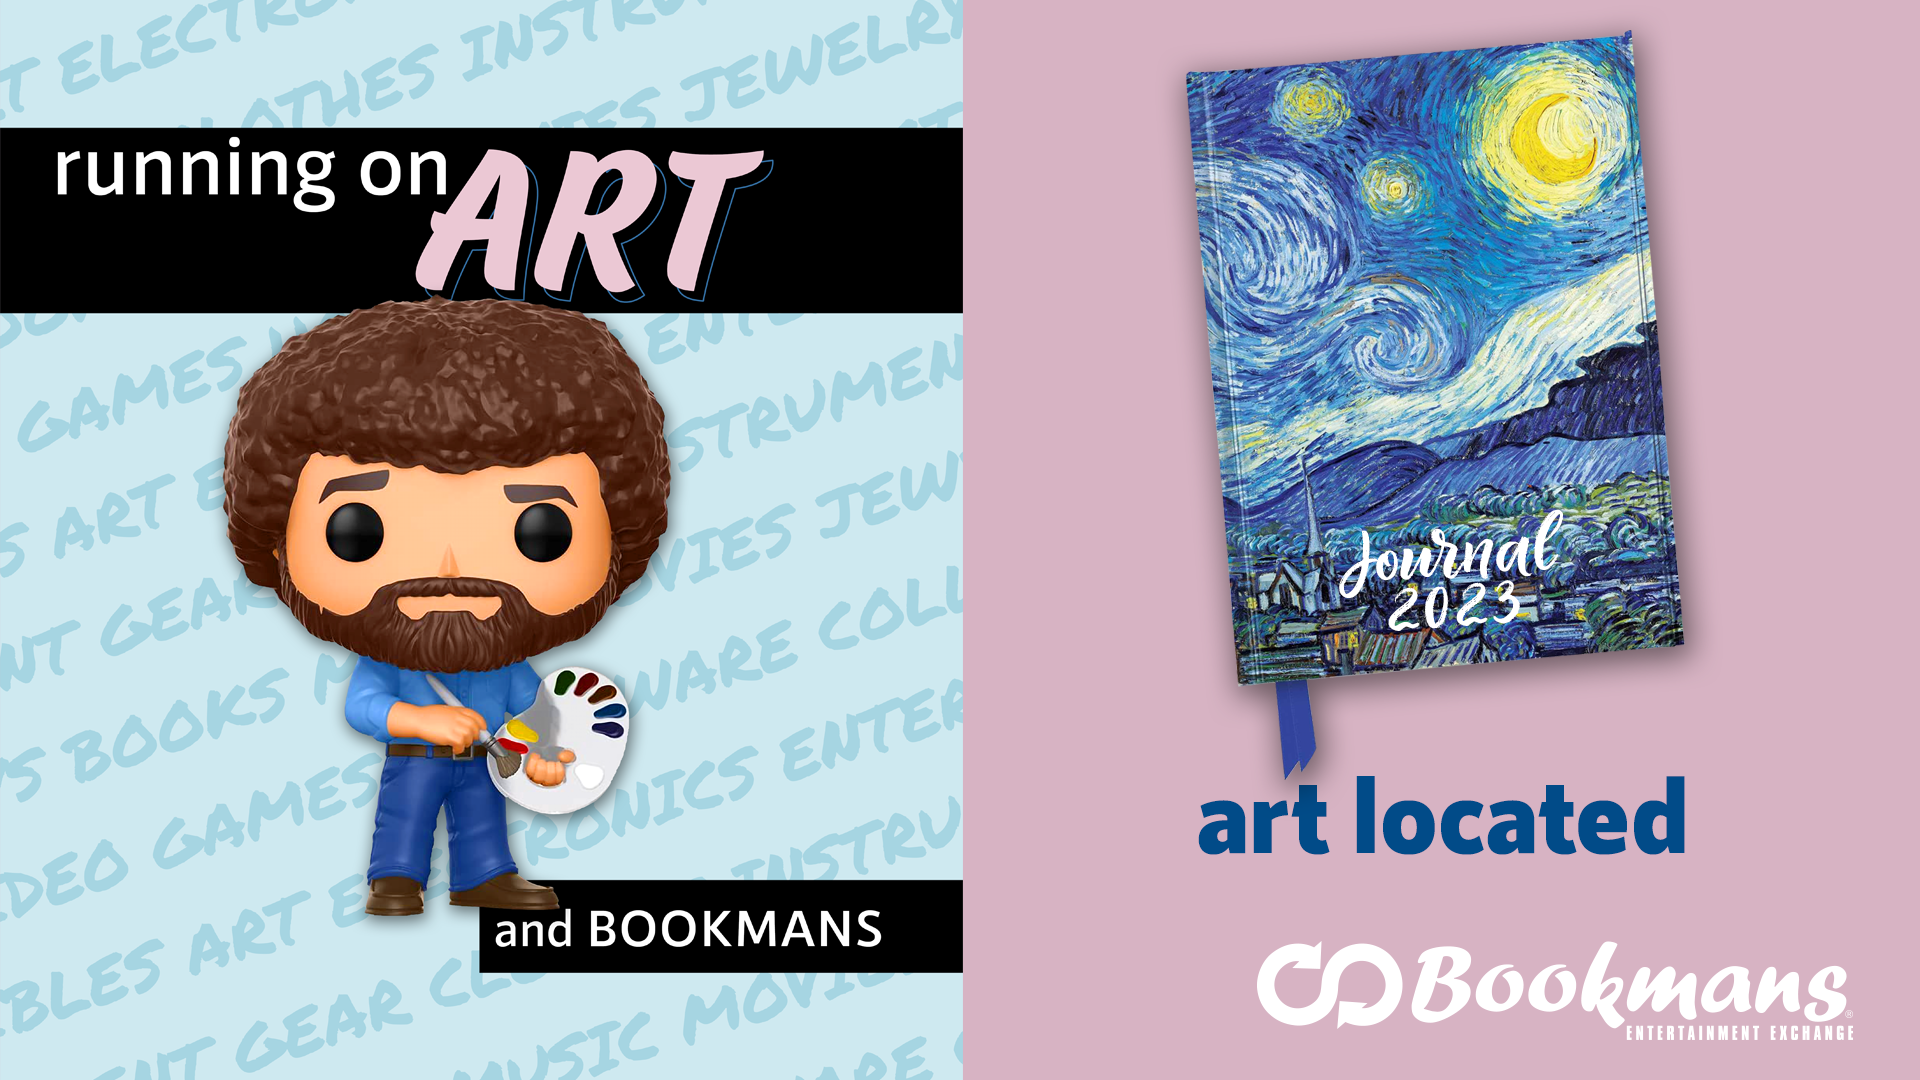 Bookmans December art featuring a Bob Ross Funko Pop figure and a journal with Van Gogh's Starry Night painting as the primary image